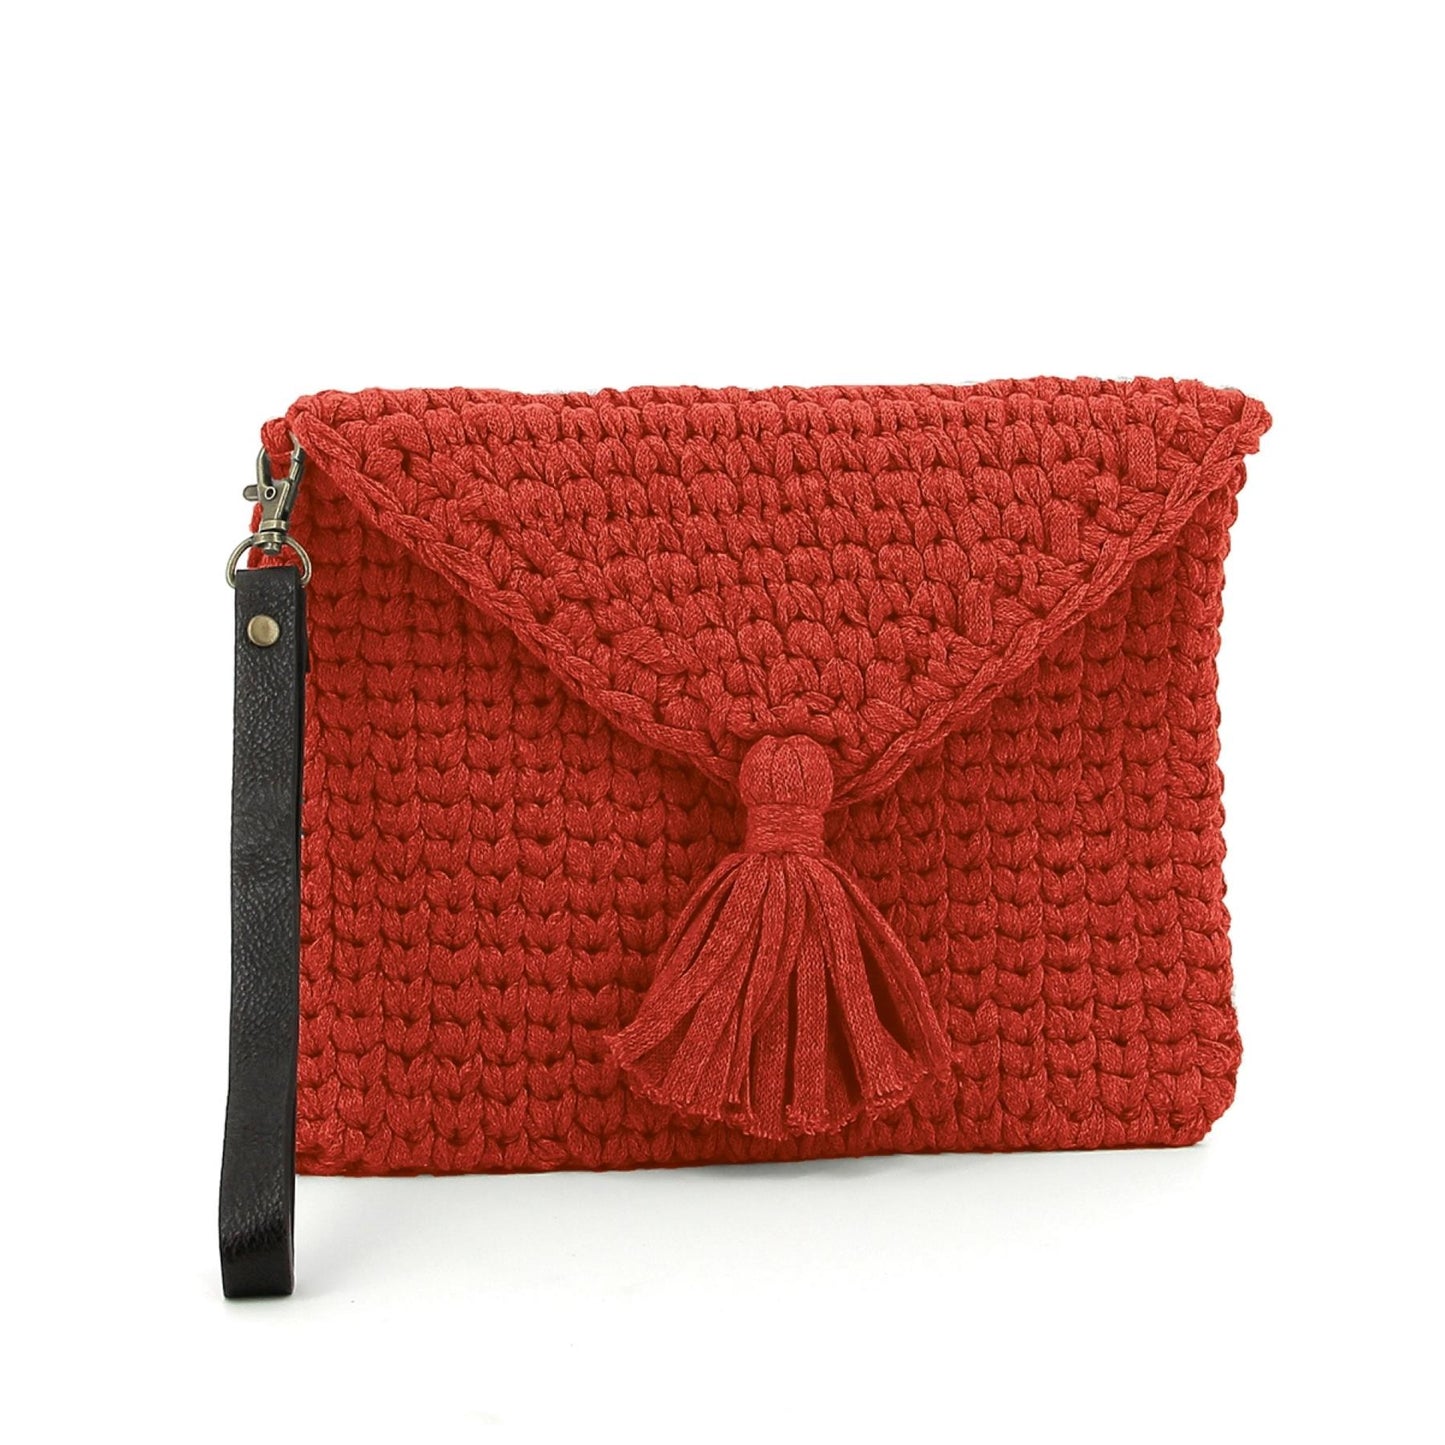 Hoooked RibbonXL Lipstick Red Cotton Knit Look Clutch Crochet Kit